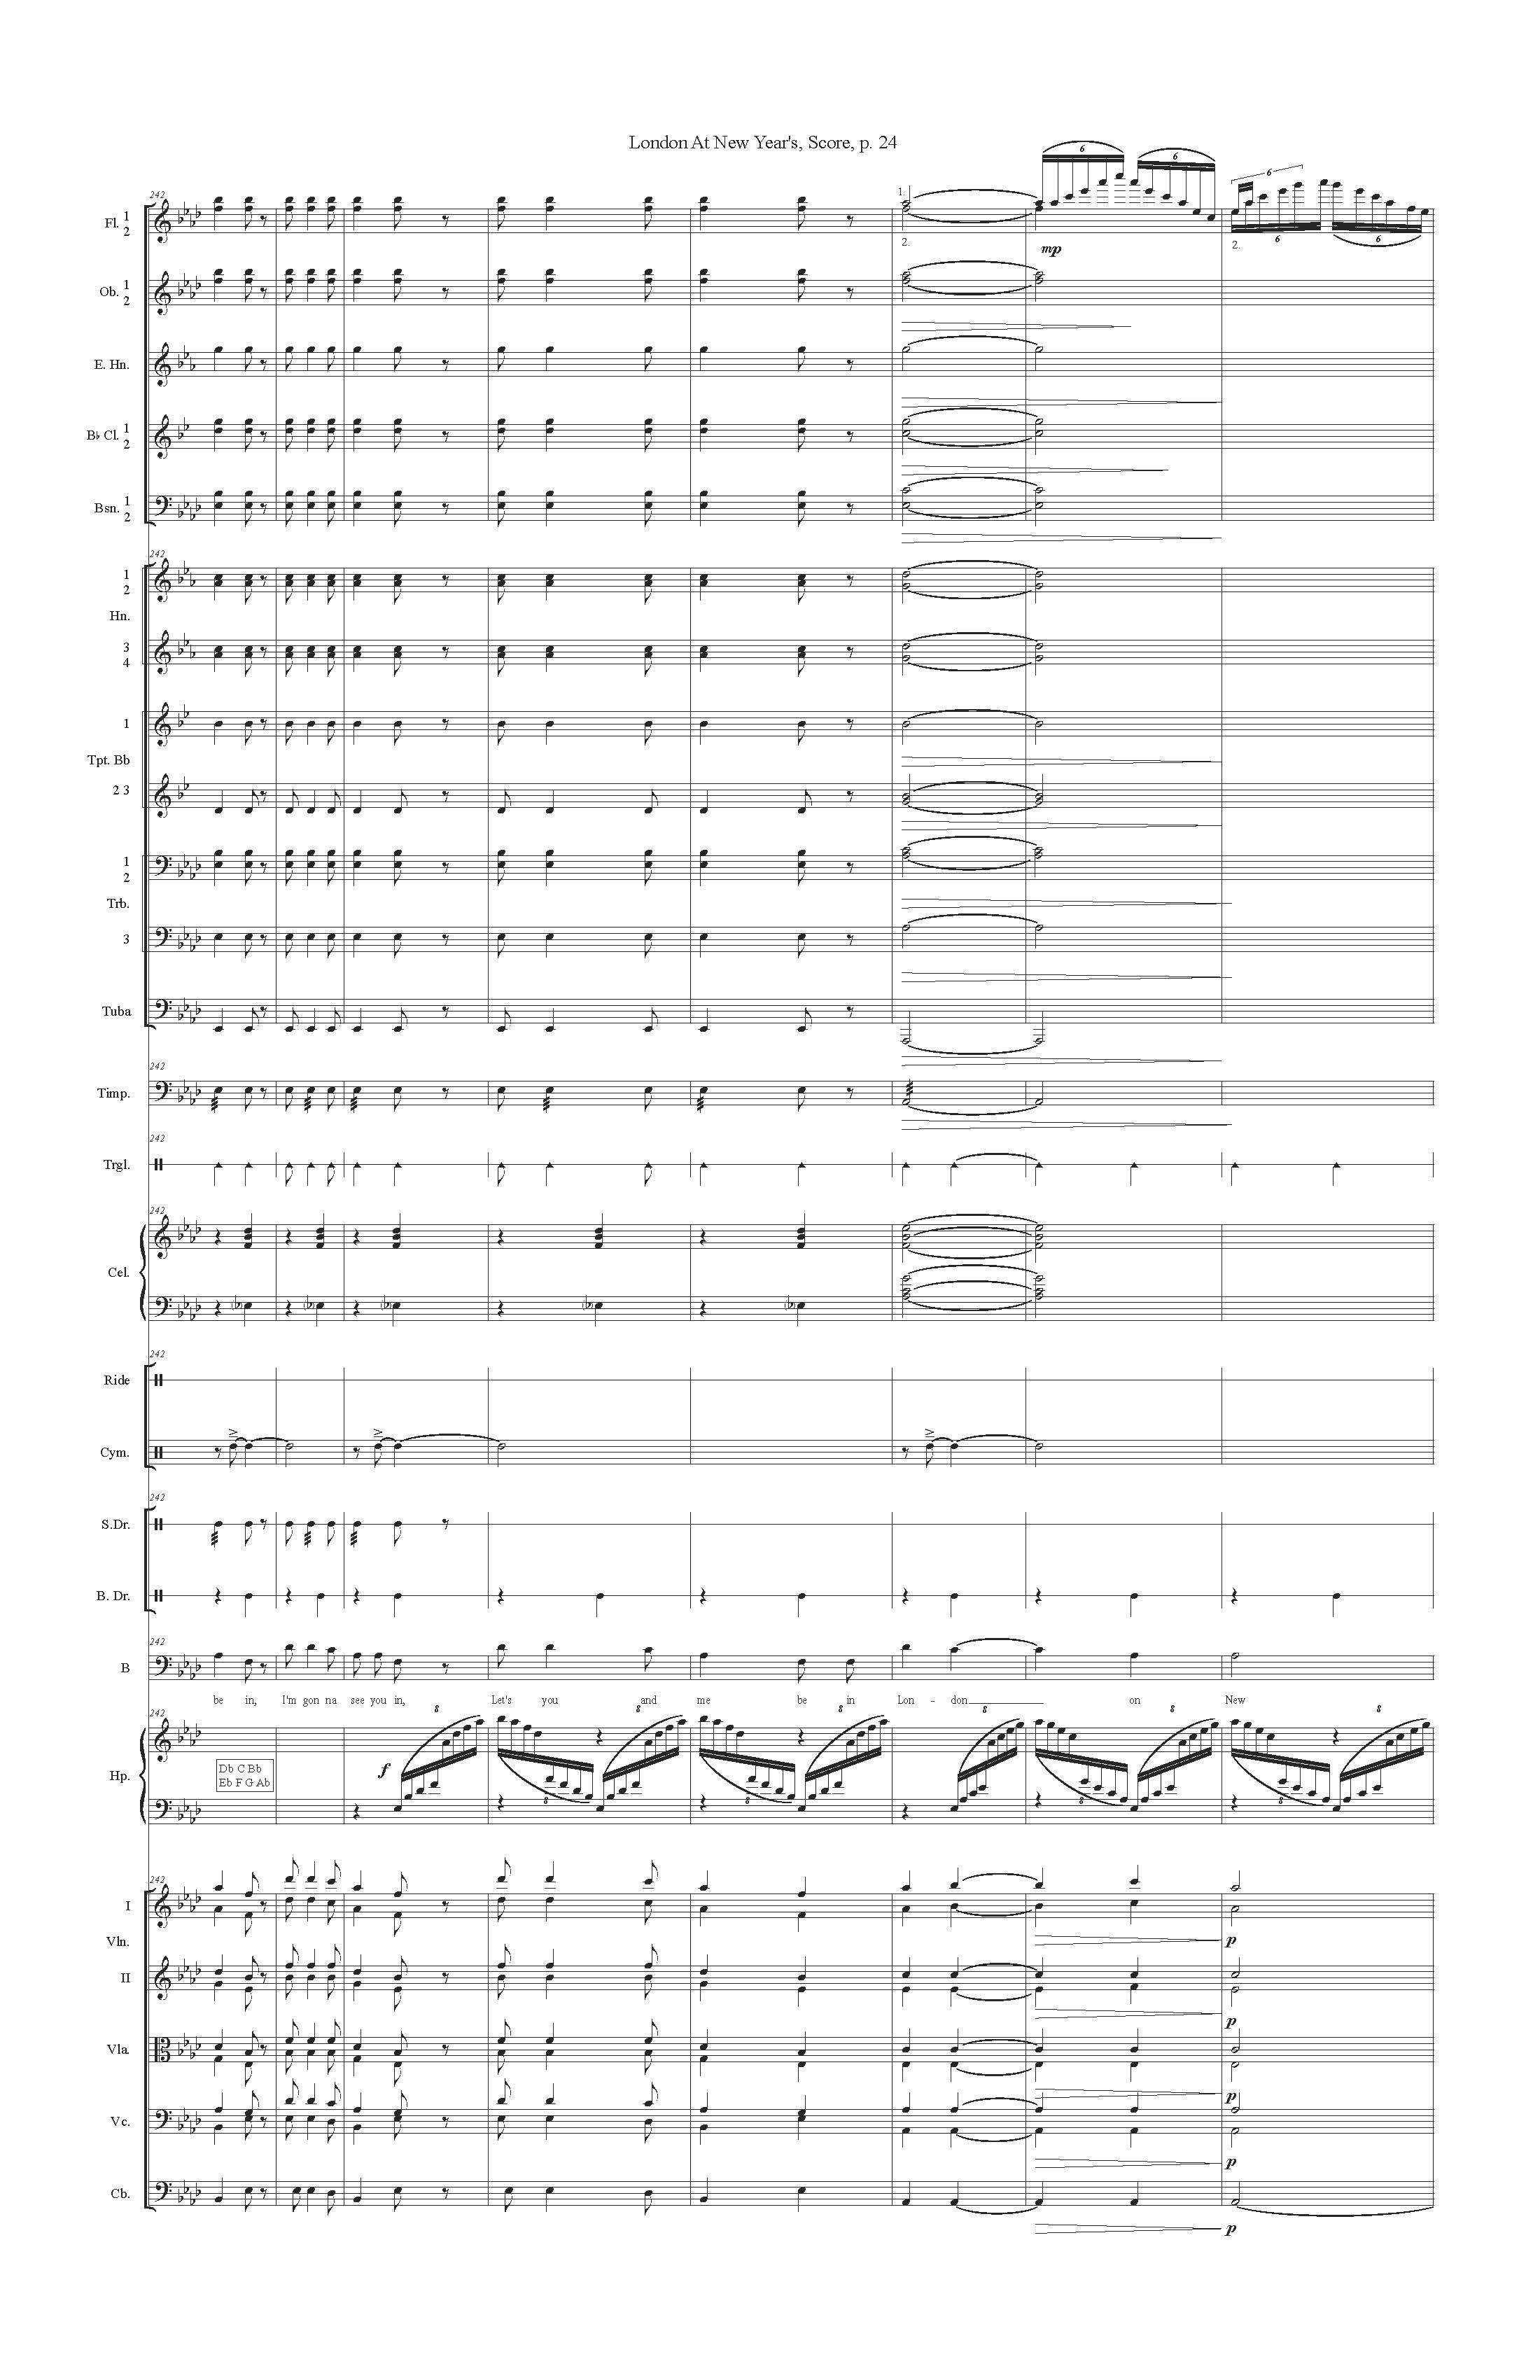 LONDON AT NEW YEARS ORCH - Score_Page_24.jpg